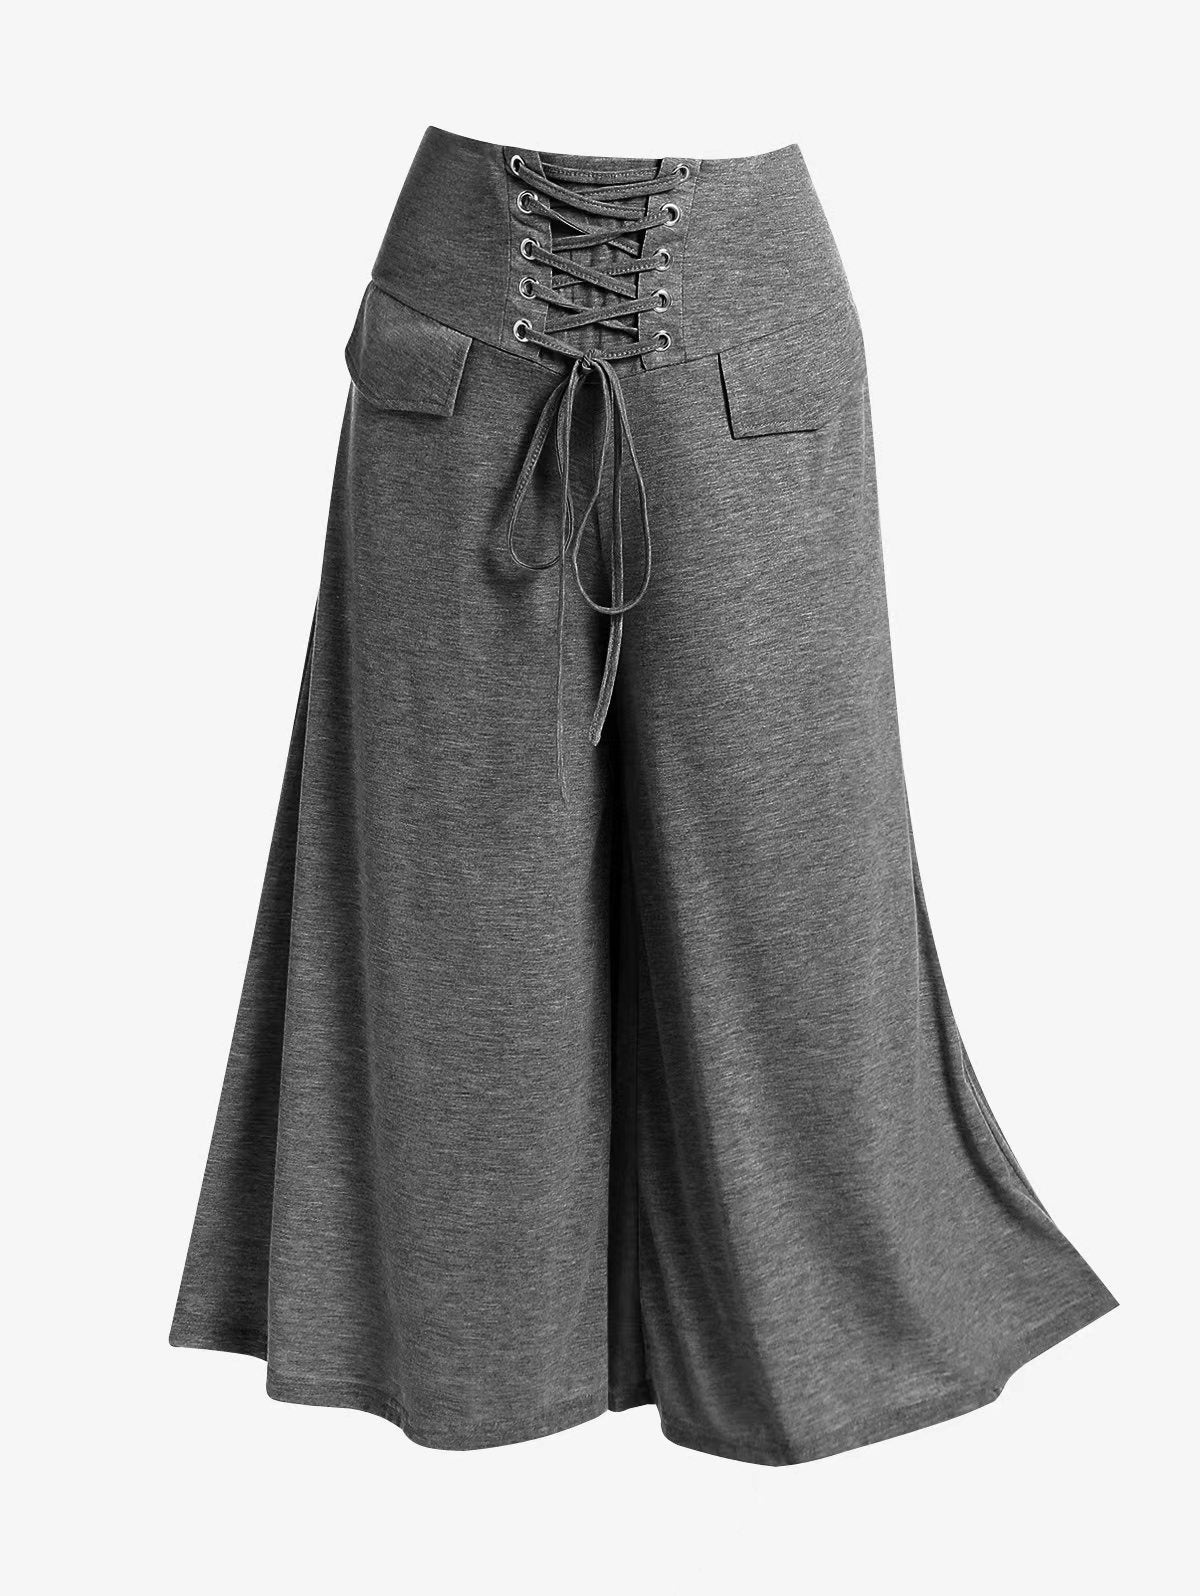 Women's Clothing High Waist With Straps Plus Size Loose Pants